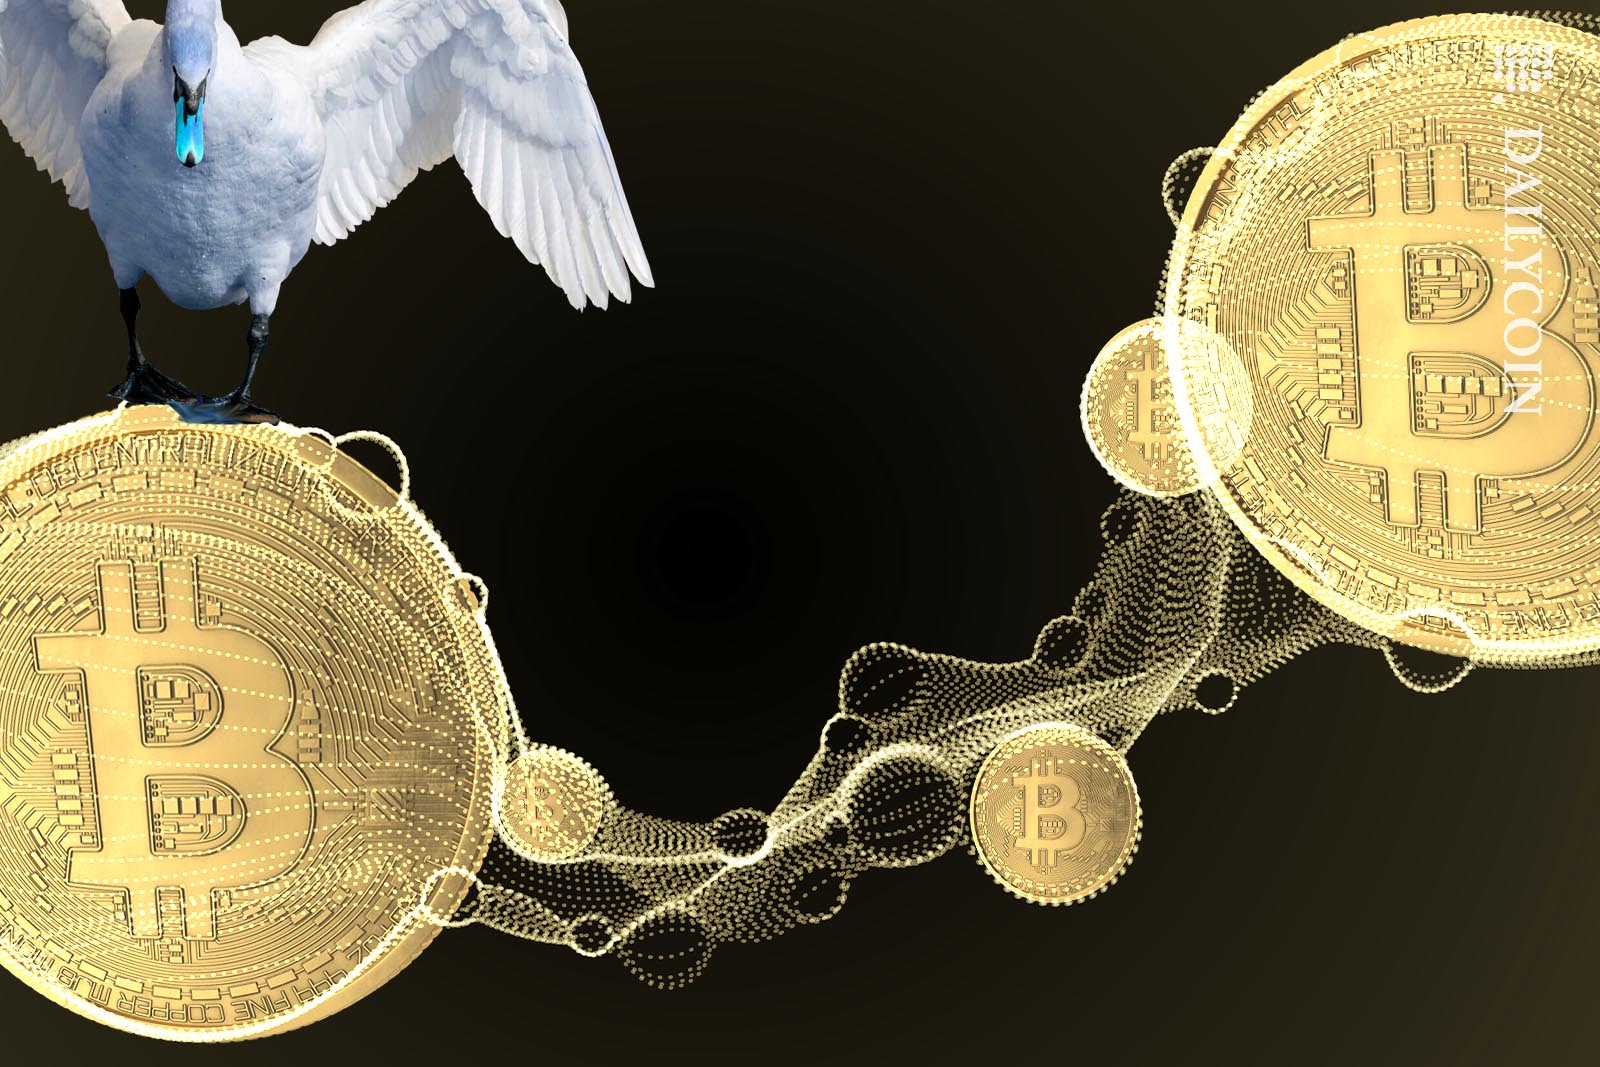 A swan standing on an organic structure of Bitcoins.